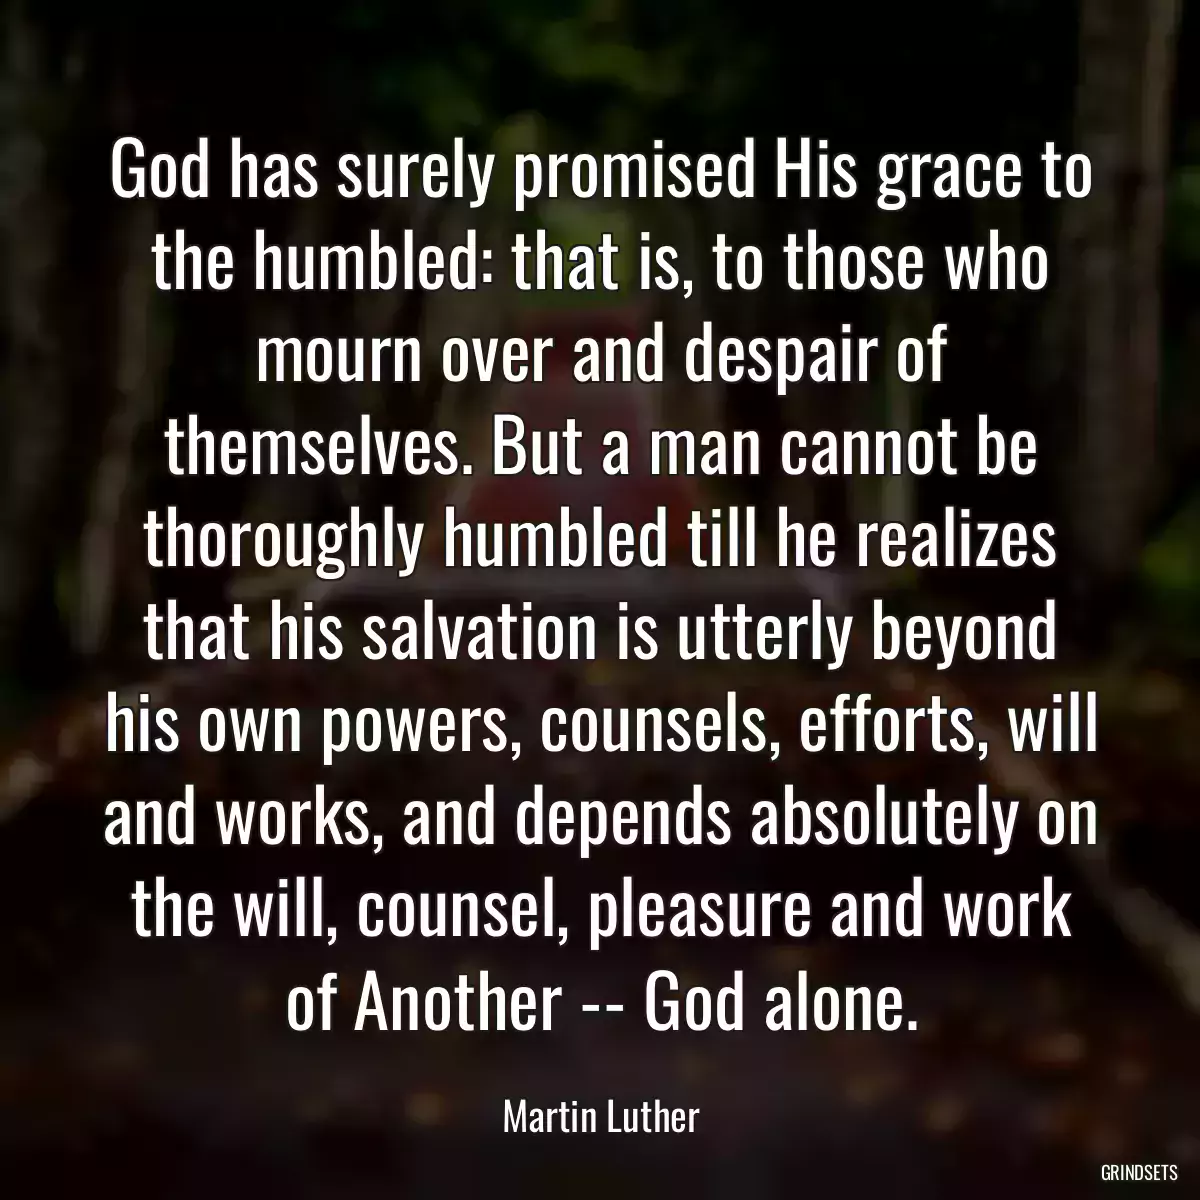 God has surely promised His grace to the humbled: that is, to those who mourn over and despair of themselves. But a man cannot be thoroughly humbled till he realizes that his salvation is utterly beyond his own powers, counsels, efforts, will and works, and depends absolutely on the will, counsel, pleasure and work of Another -- God alone.